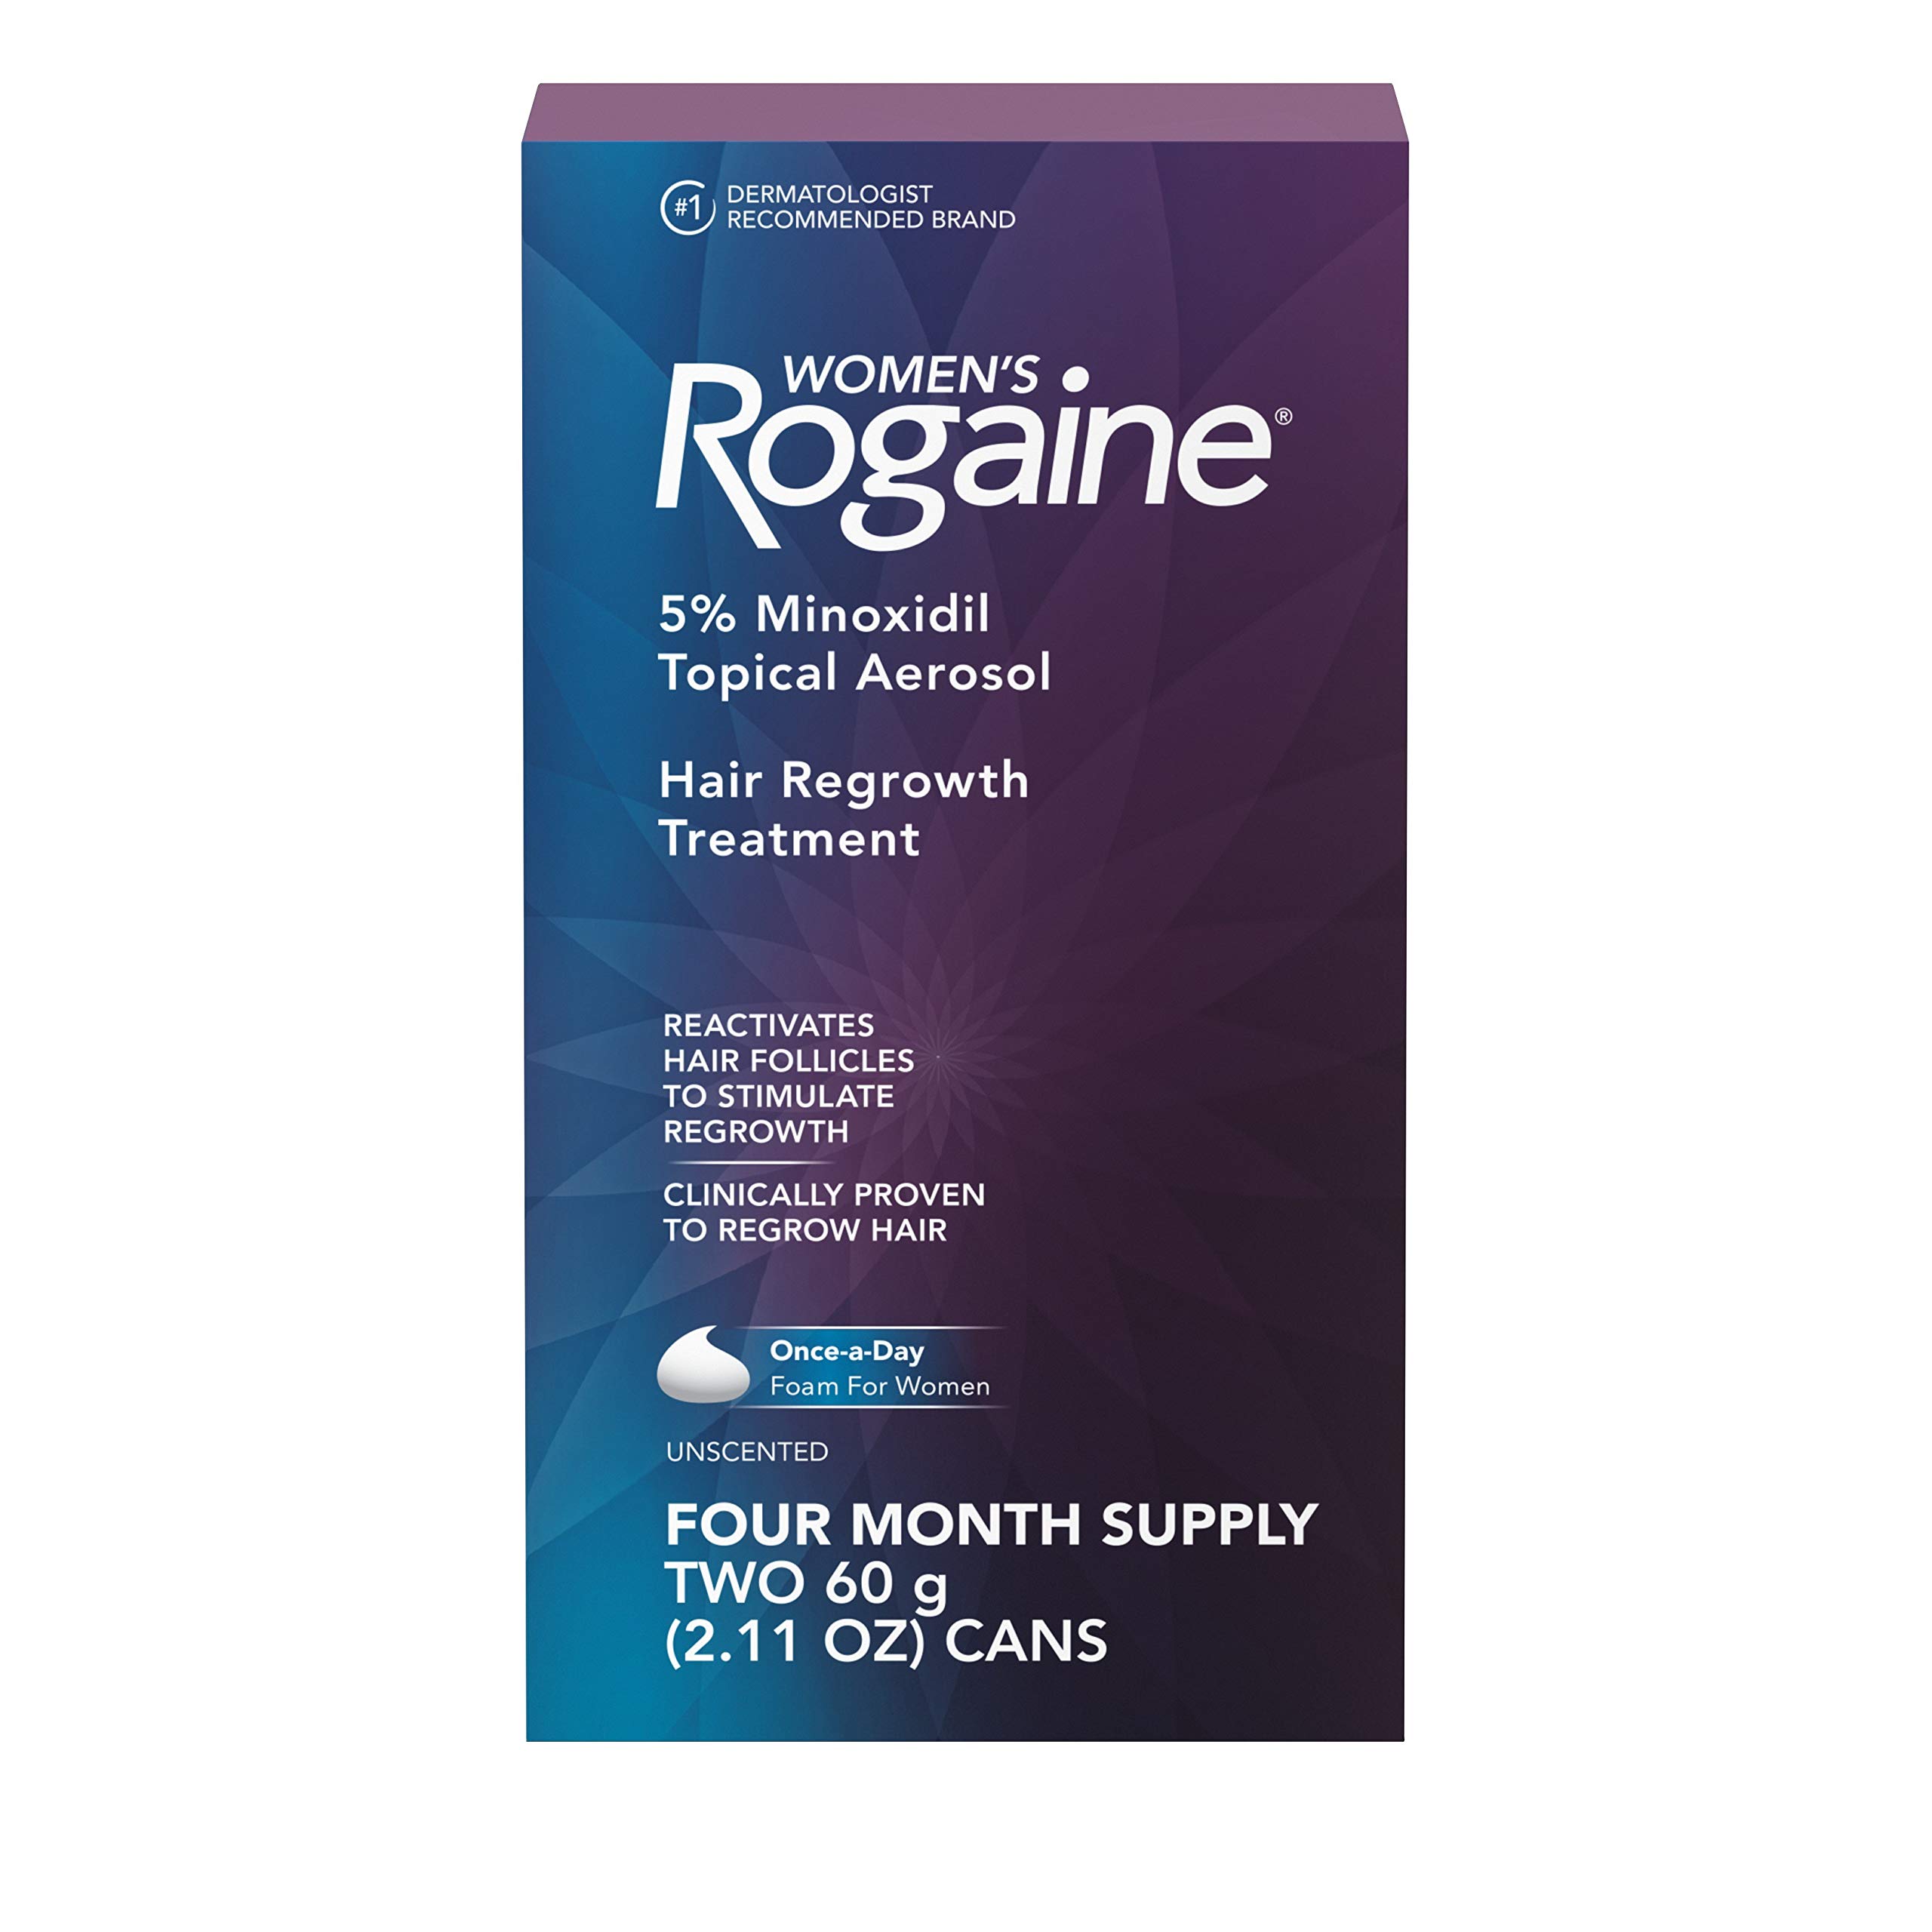 Women's Rogaine 5% Minoxidil Foam & Rogaine 5% Minoxidil Foam for Hair Loss and Hair Regrowth, Topical Treatment for Thinning Hair, 3-Month Supply, 2.11 Ounce (Pack of 3)